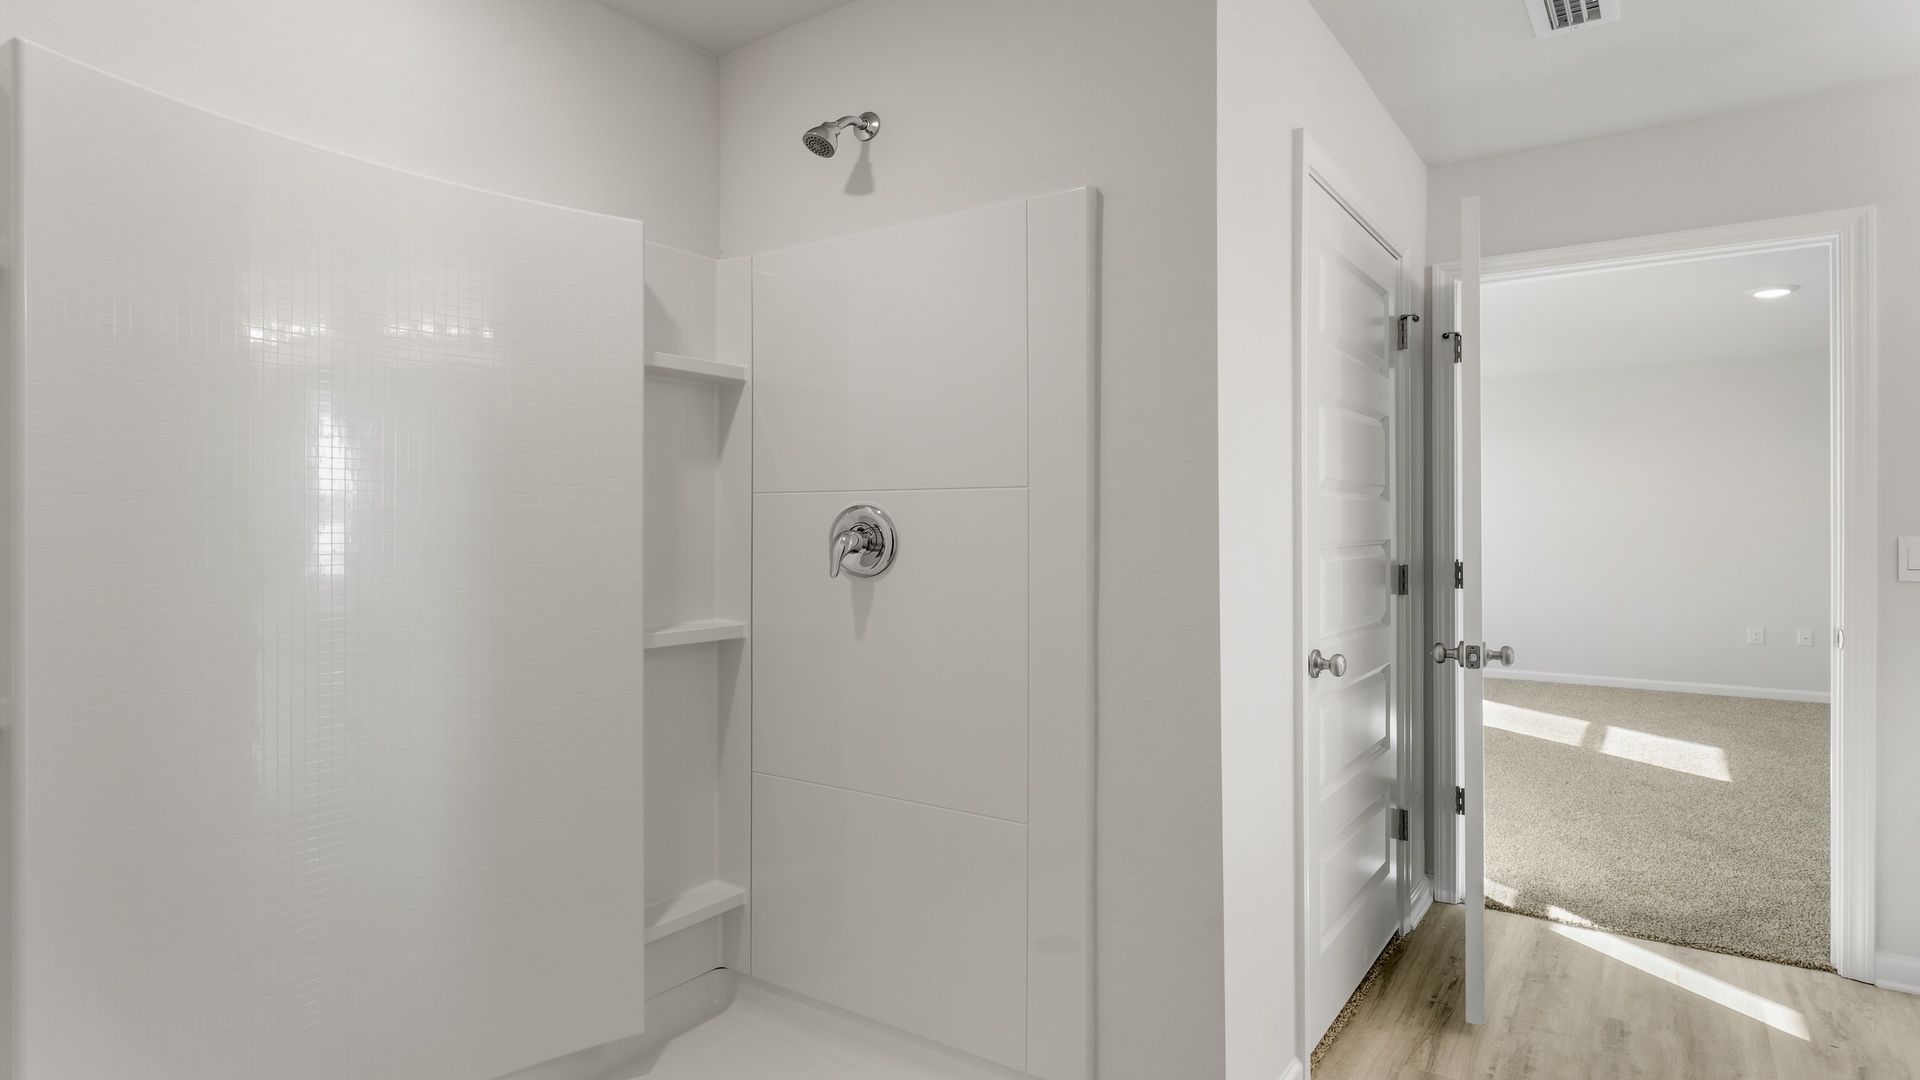 Primary bathroom with shower and bedroom entrance.